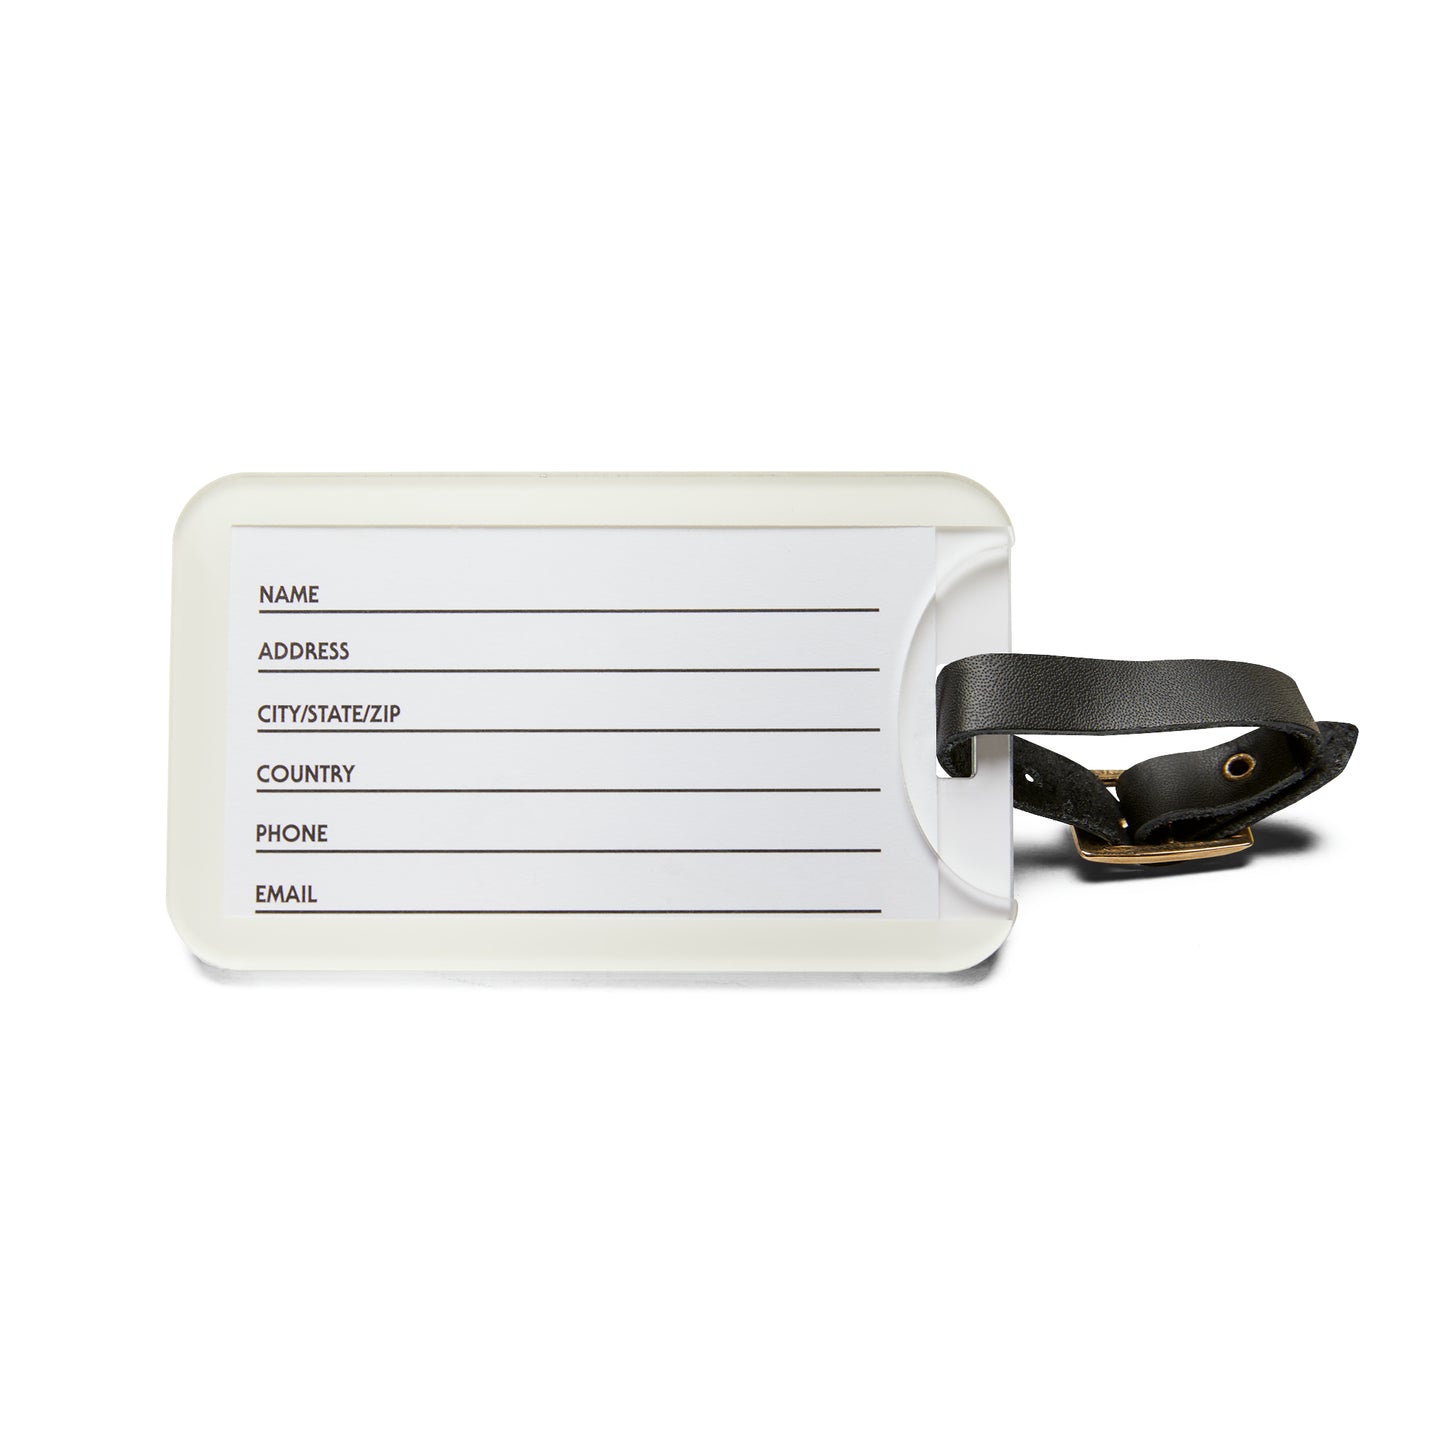 Lux Travel Luggage Tag